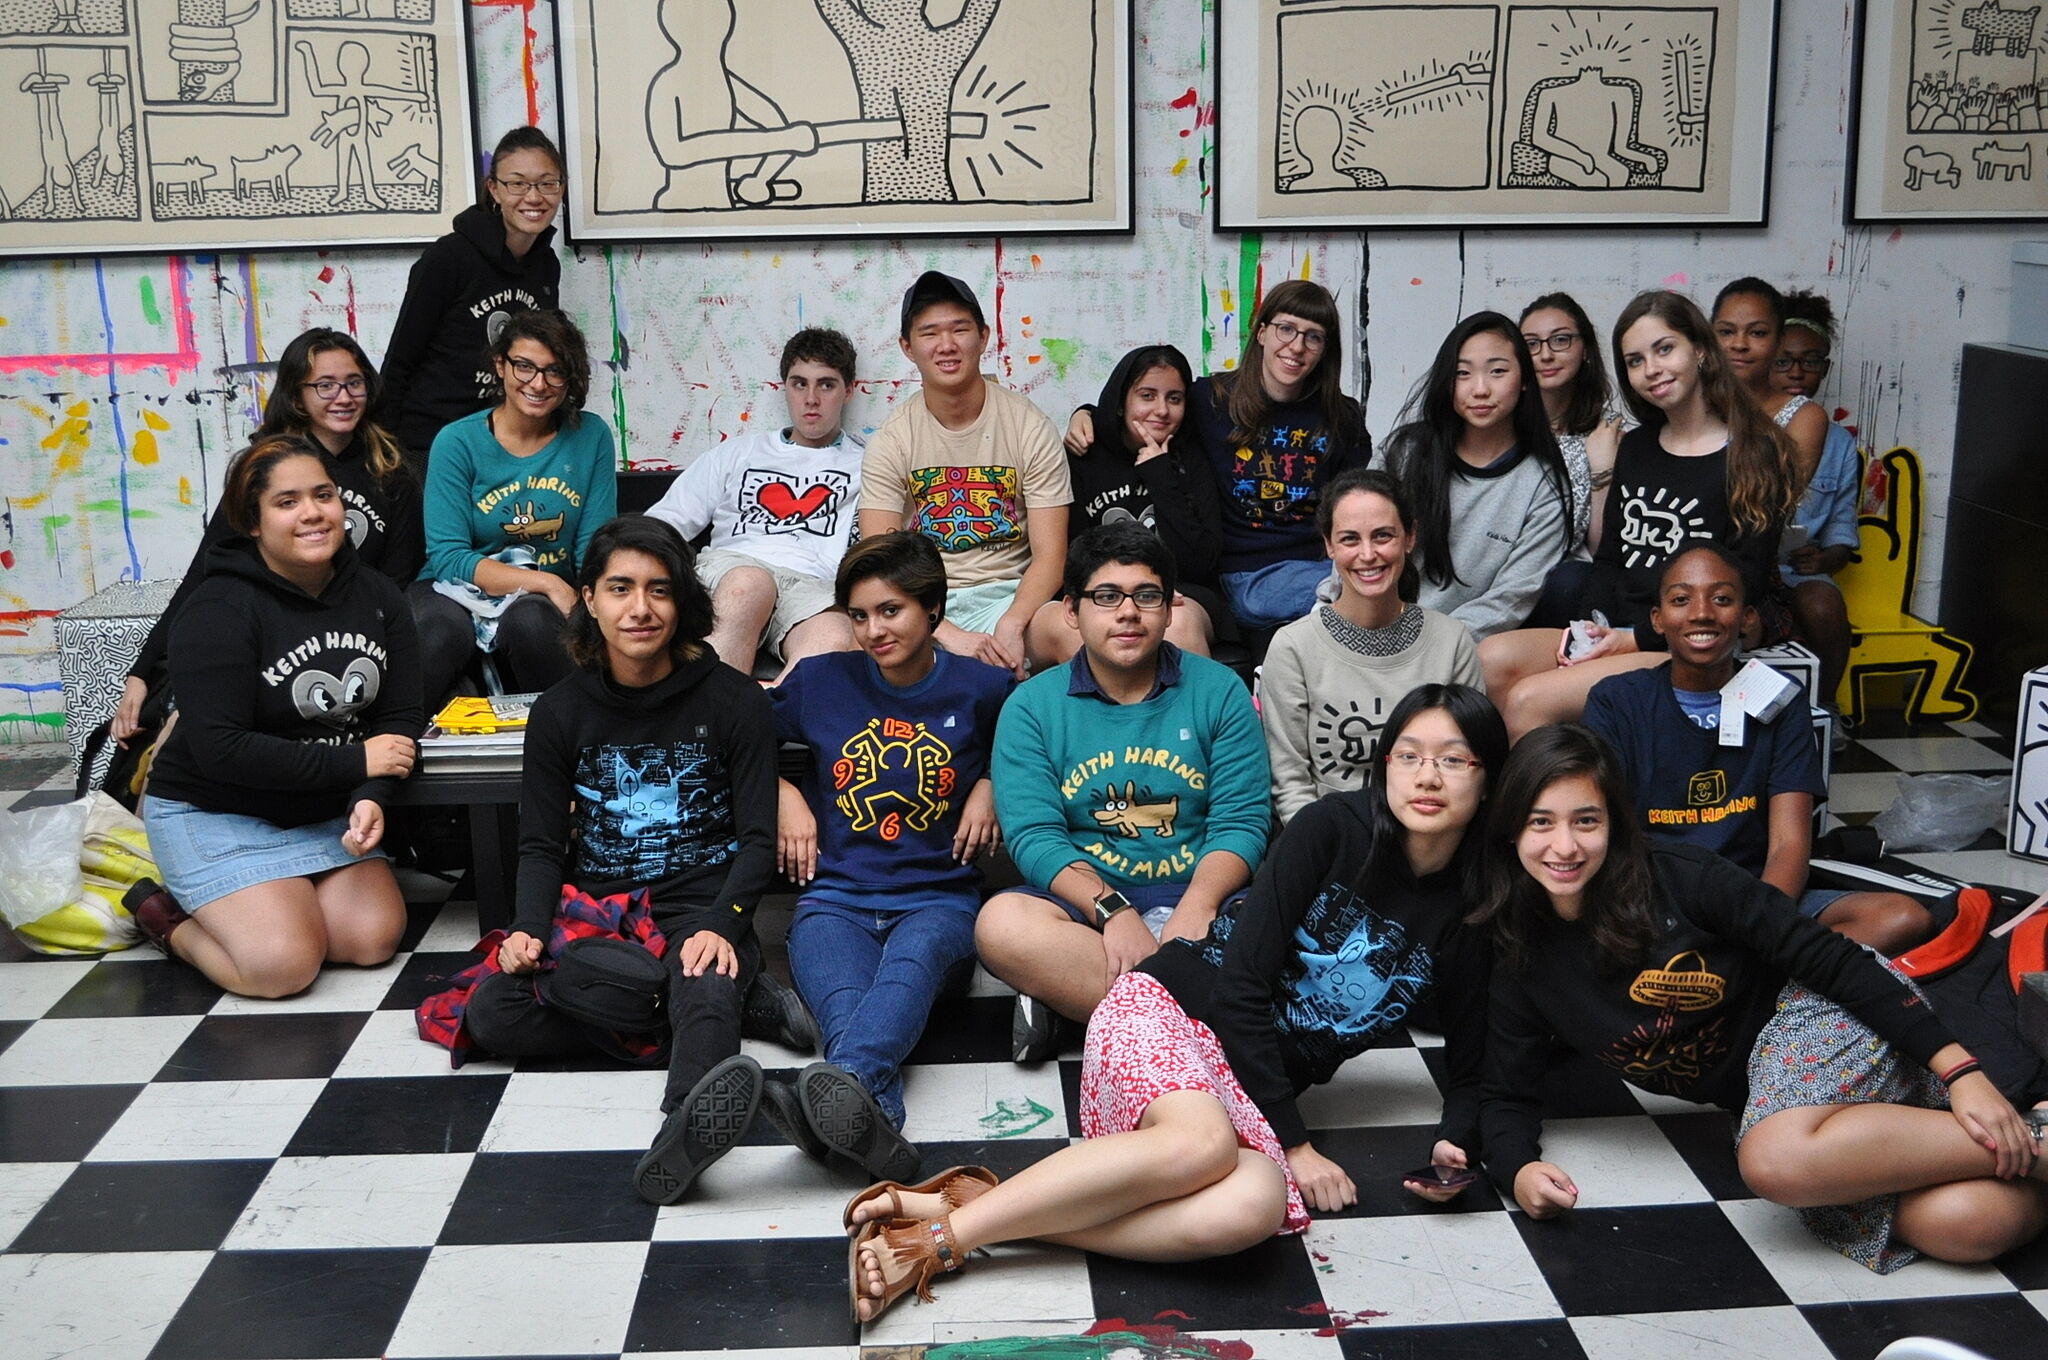 teens sit and pose in front of artwork